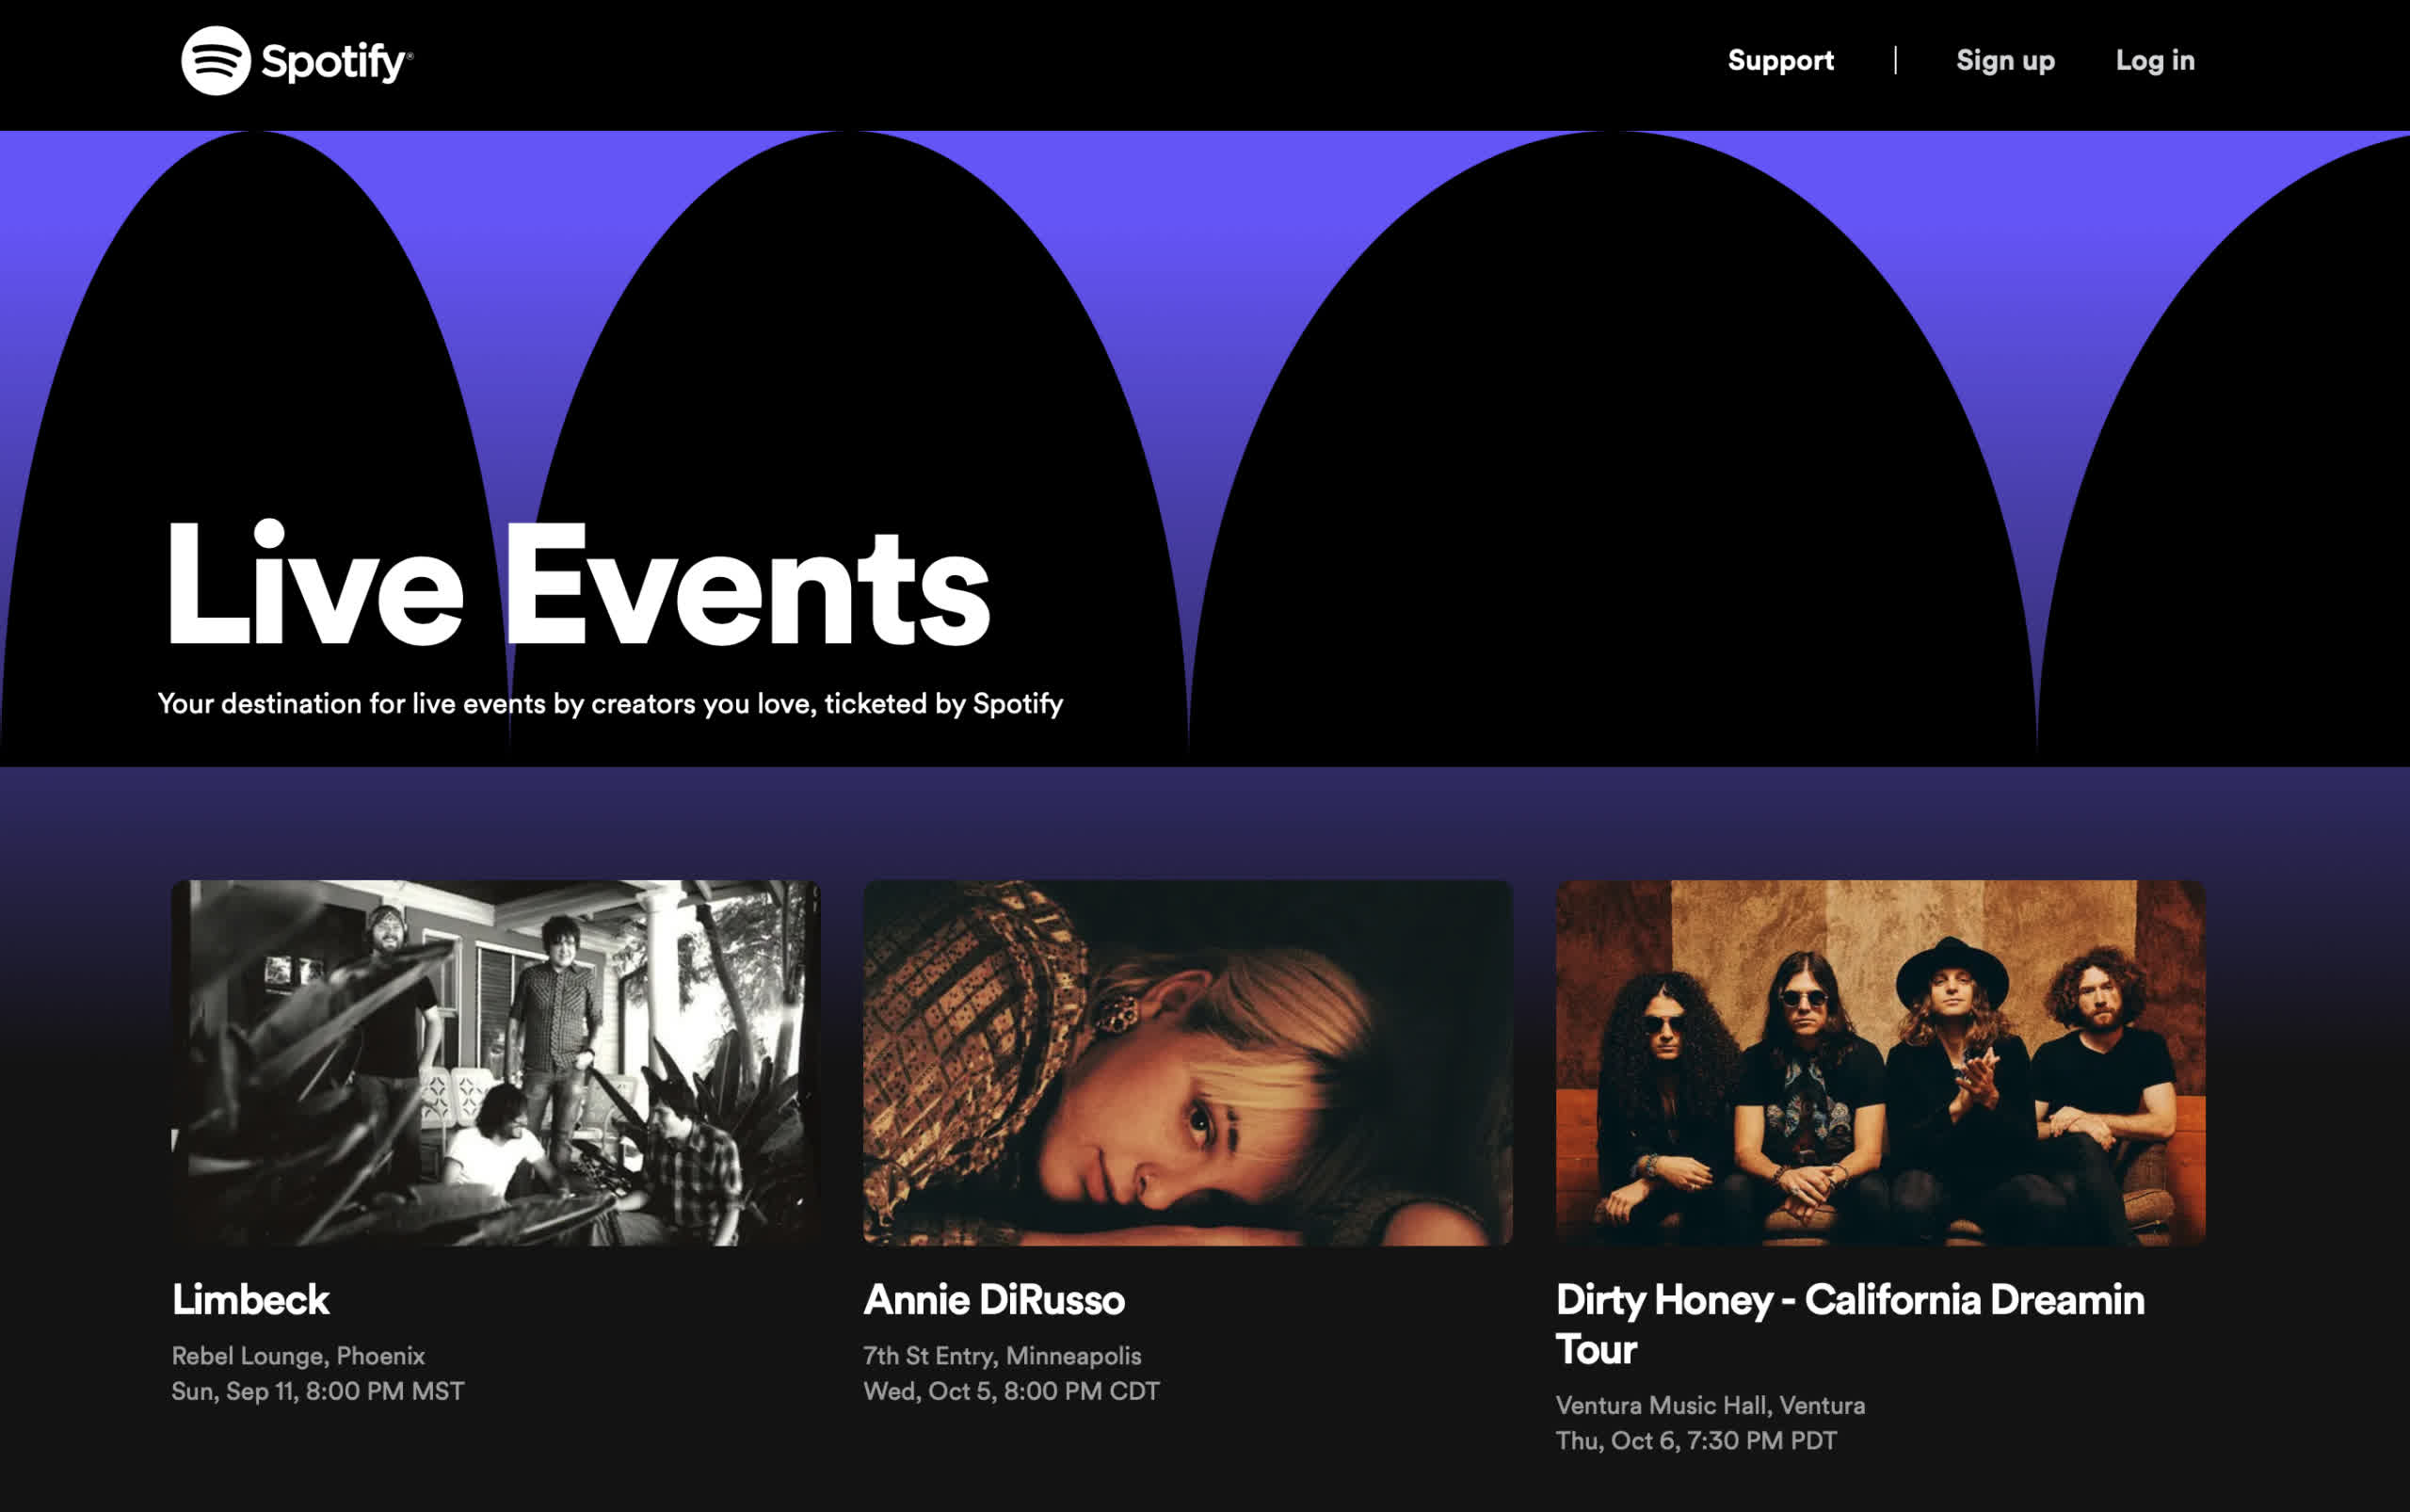 Spotify dips its toes into concert tickets with new Live Events section